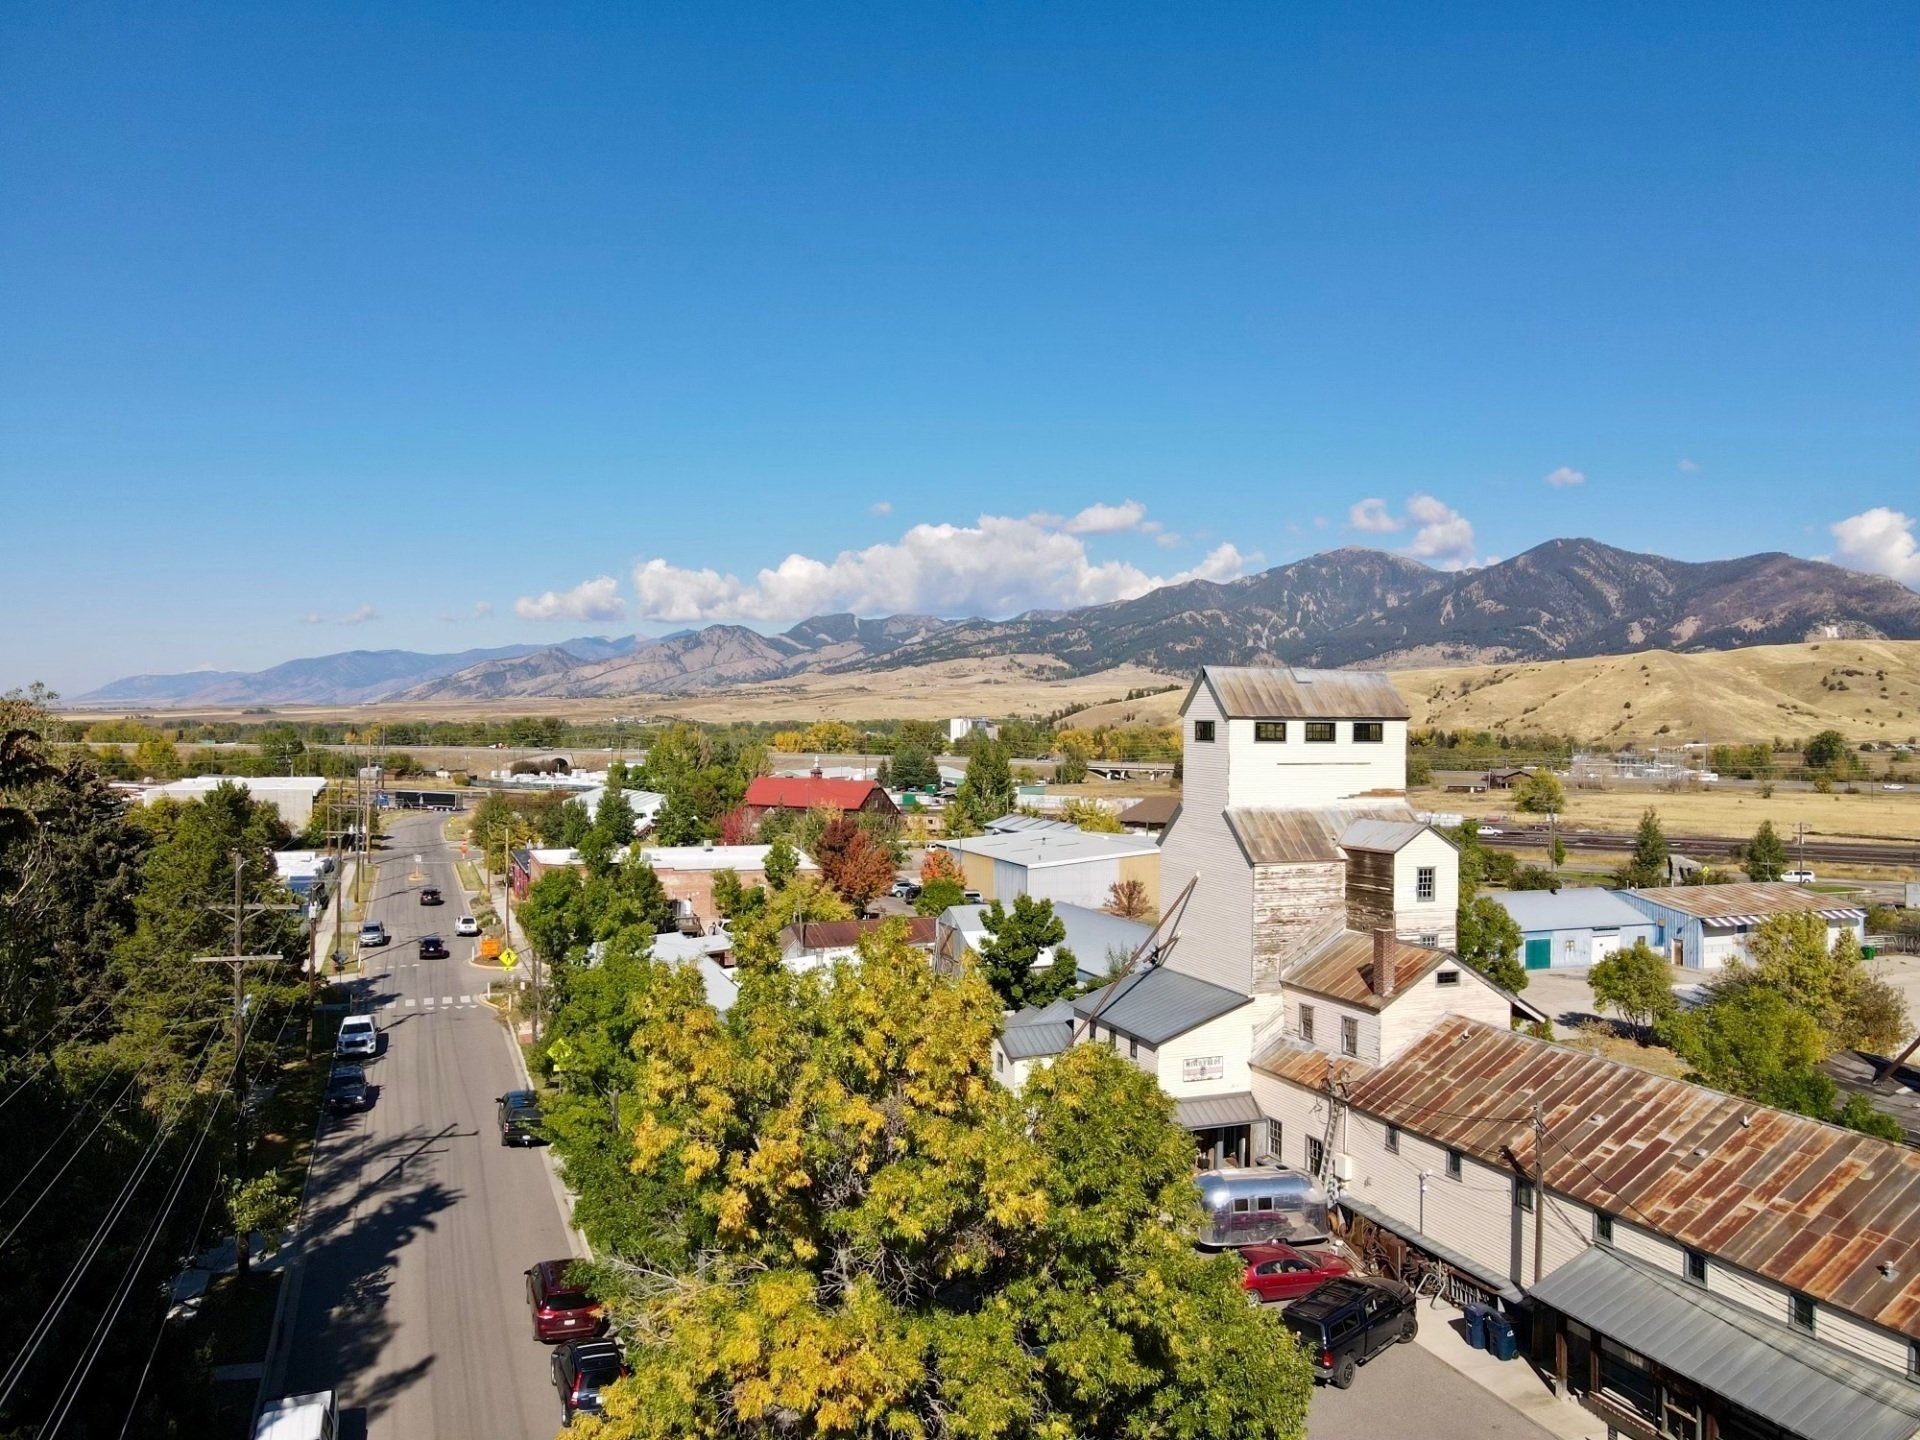 suburban neighborhood with a large building and road running through it with a view of the bridger mountains